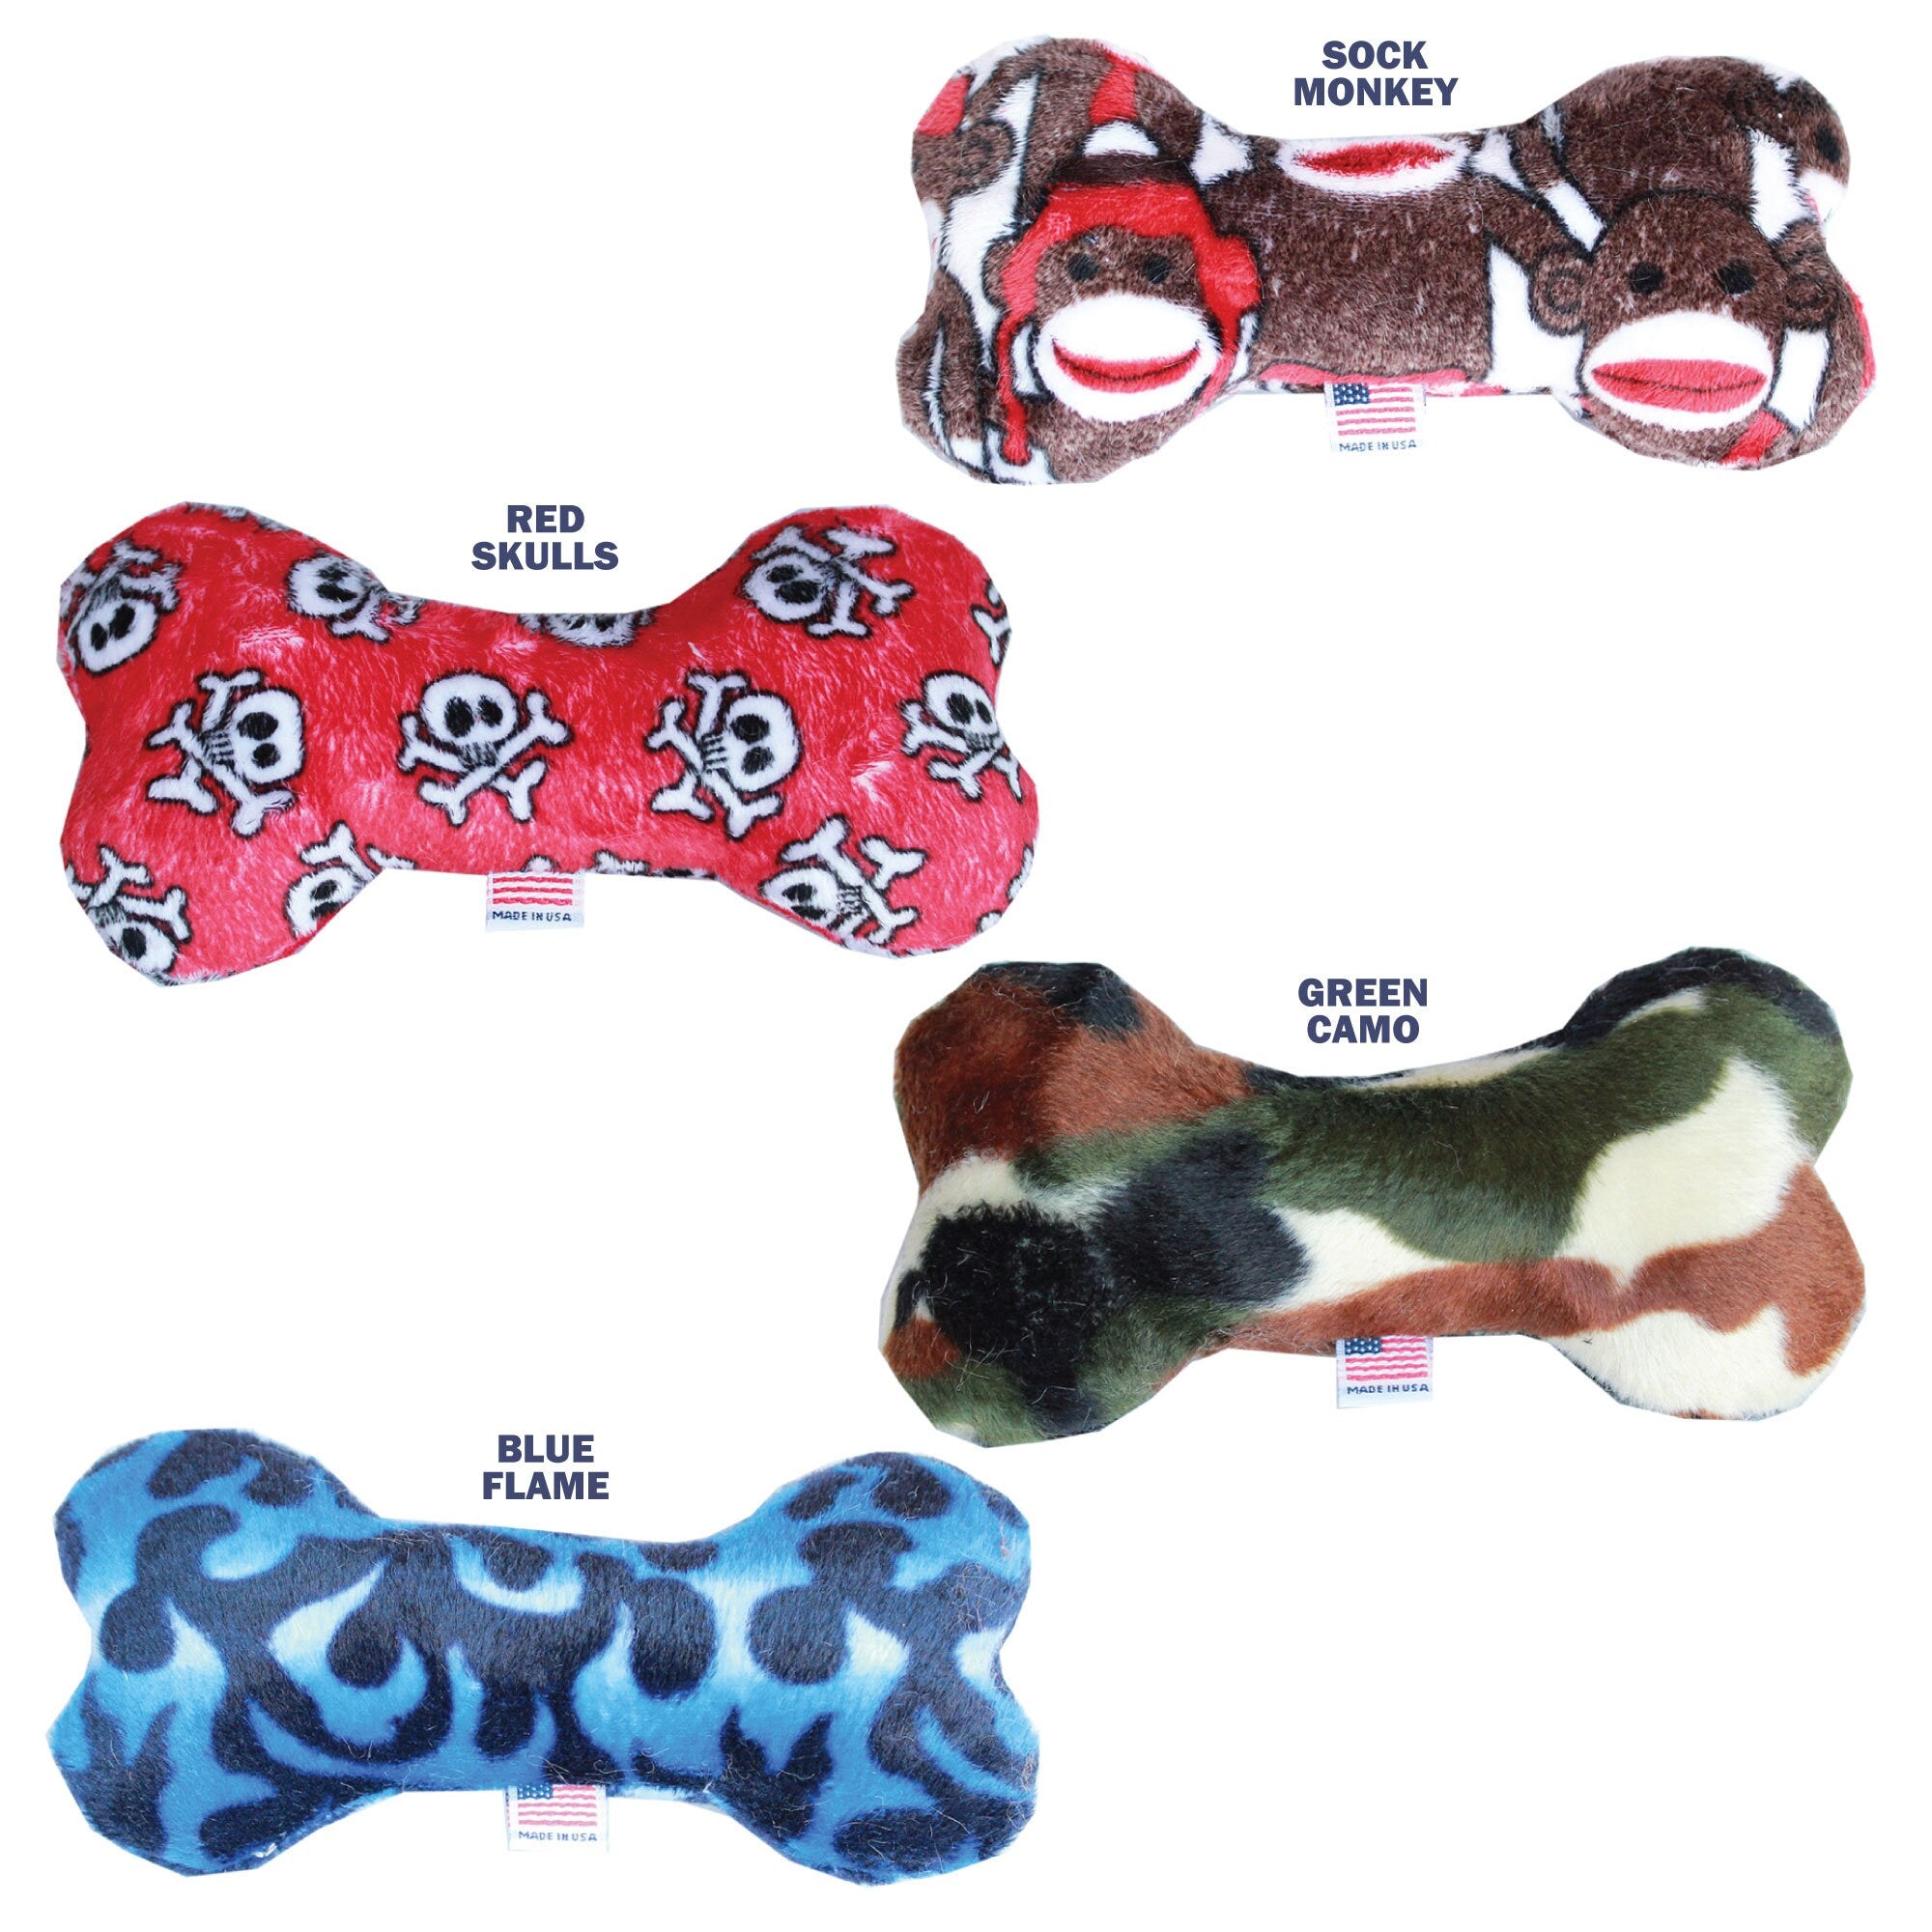 Pet and Dog Plush 6" Bone Toy, "Good Boy Group" (Available in 4 different pattern options!)